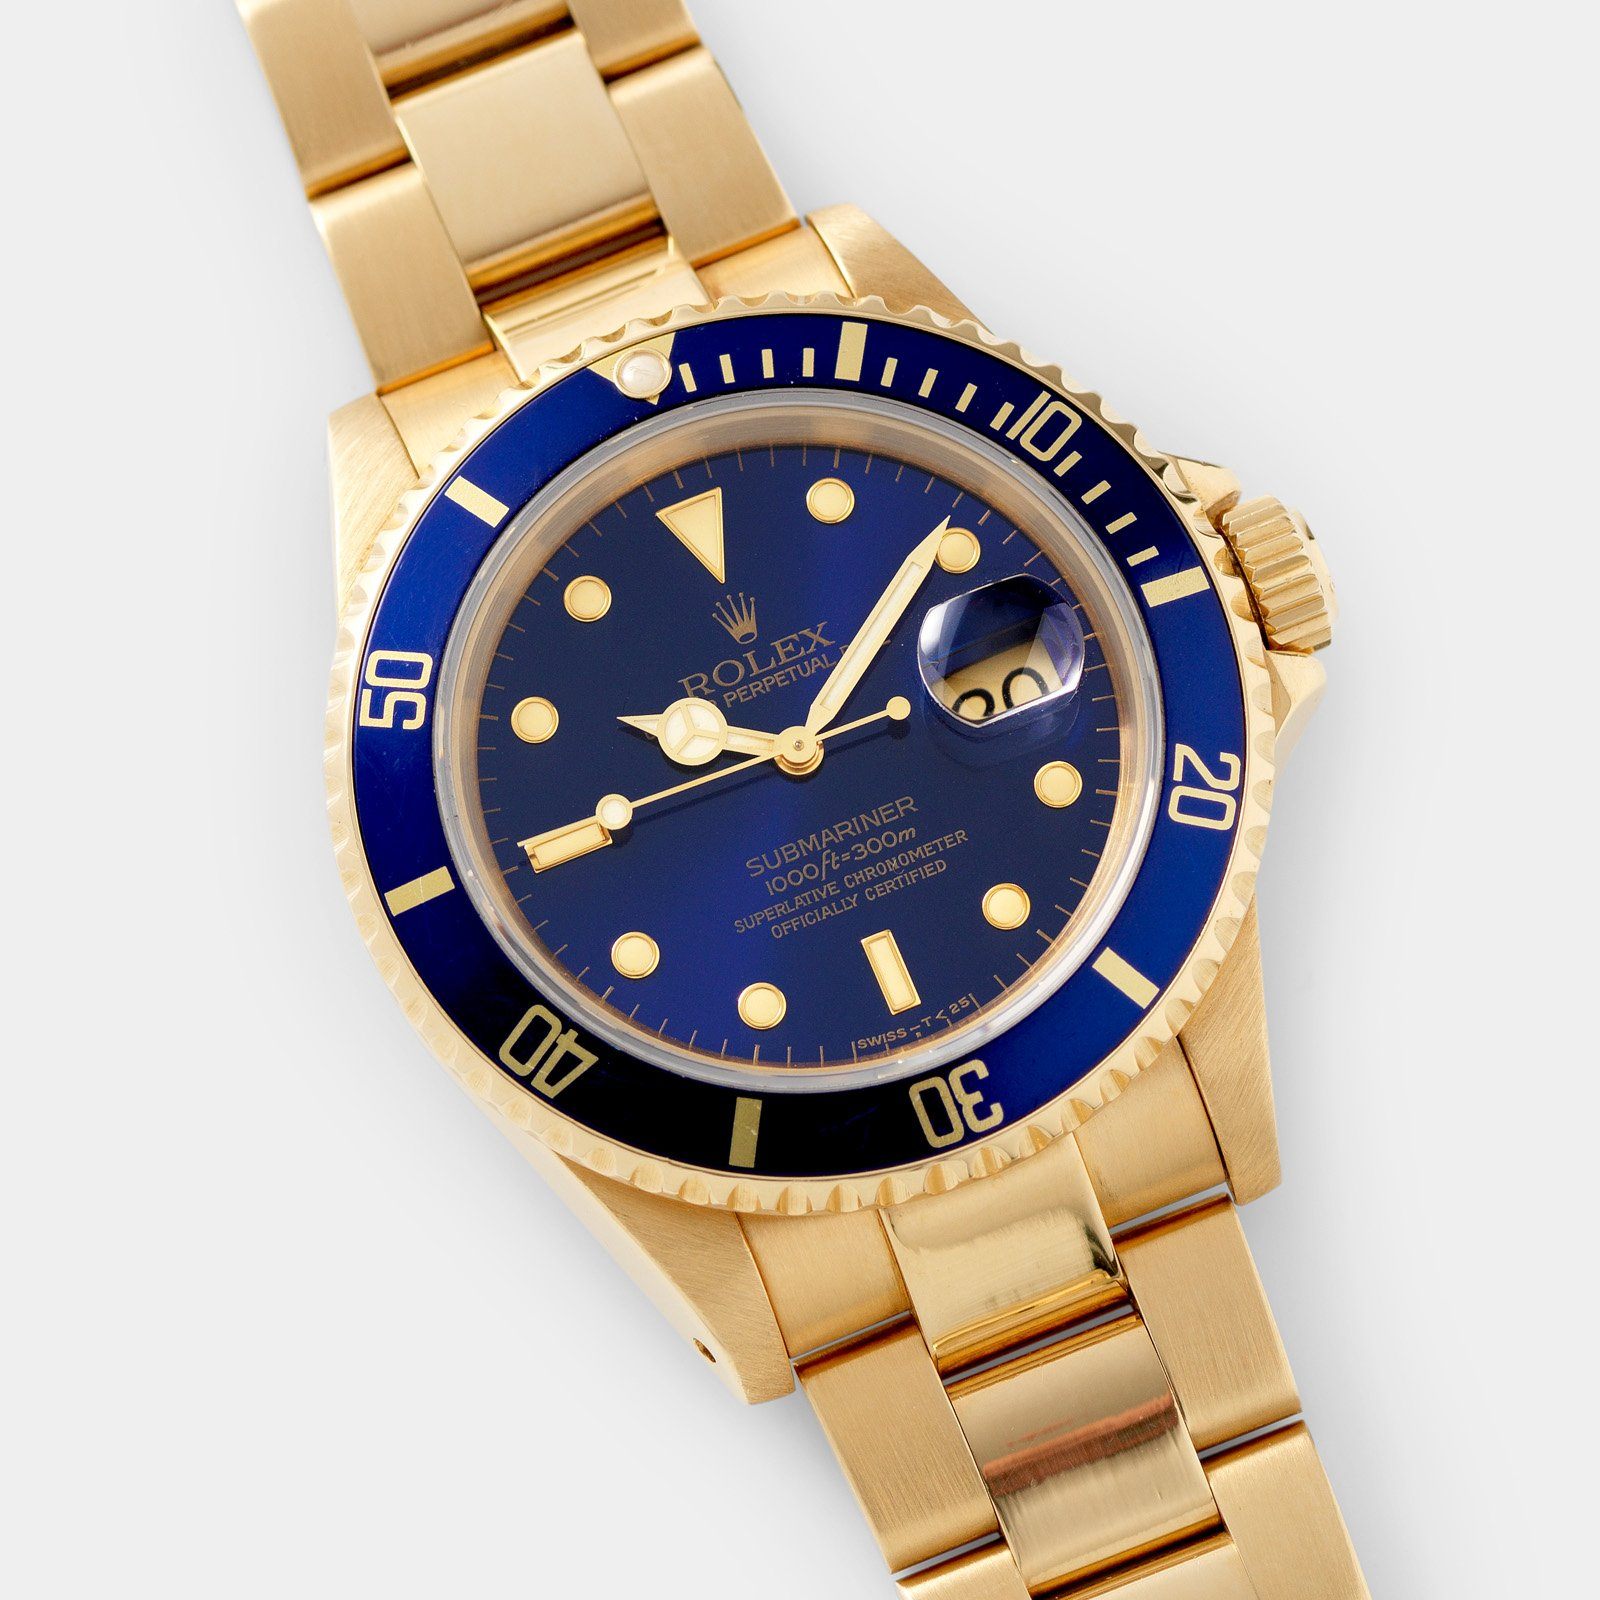 Rolex Submariner Date Purple Dial Yellow Gold 16618 Box and Papers